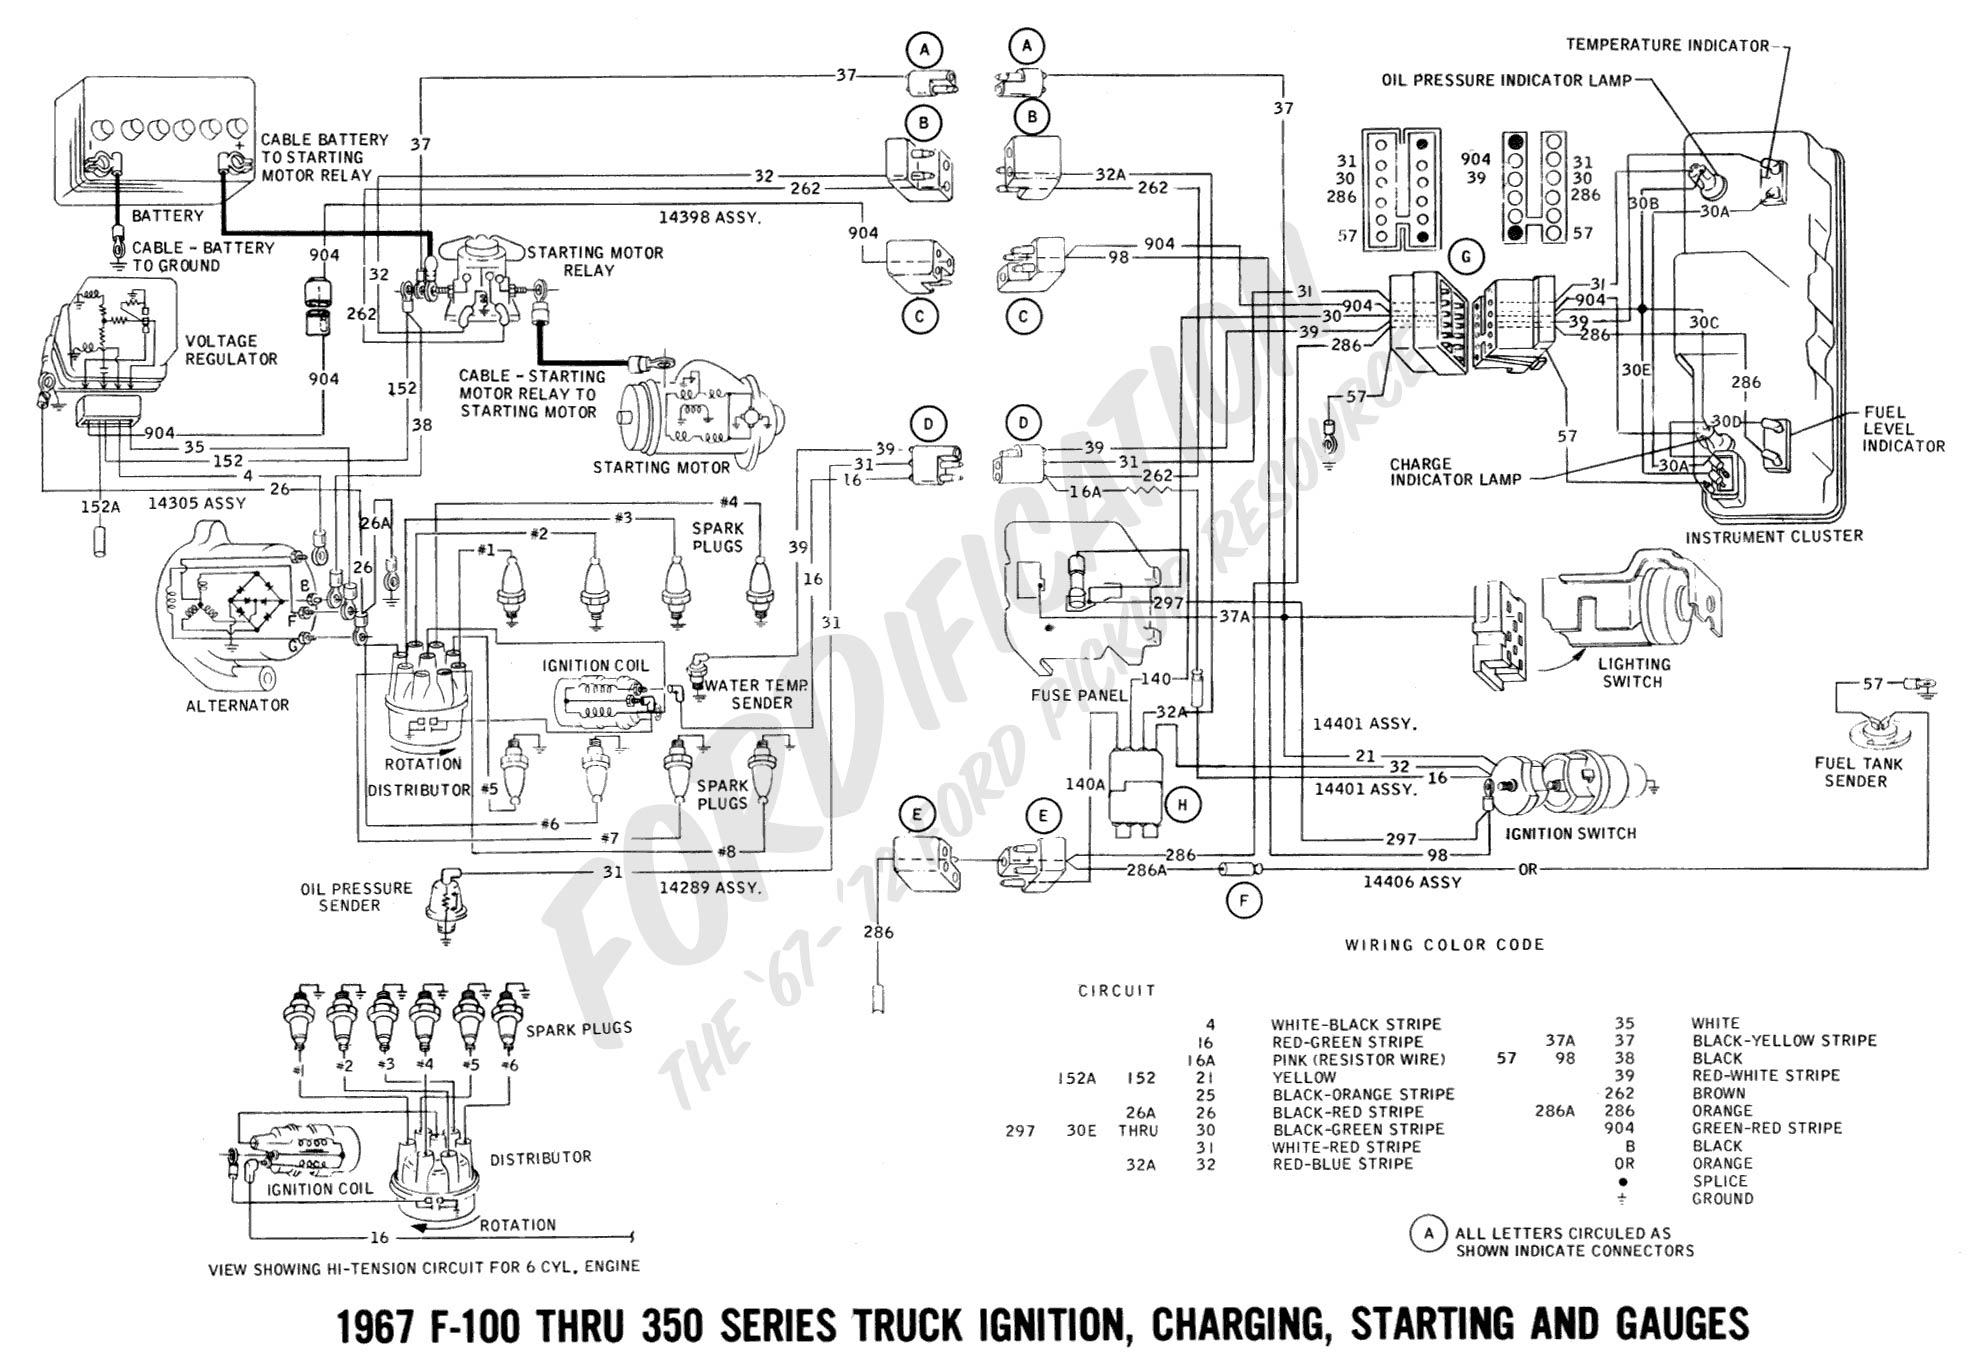 2005 Ford F150 Stereo Wiring Diagram from www.fordification.com